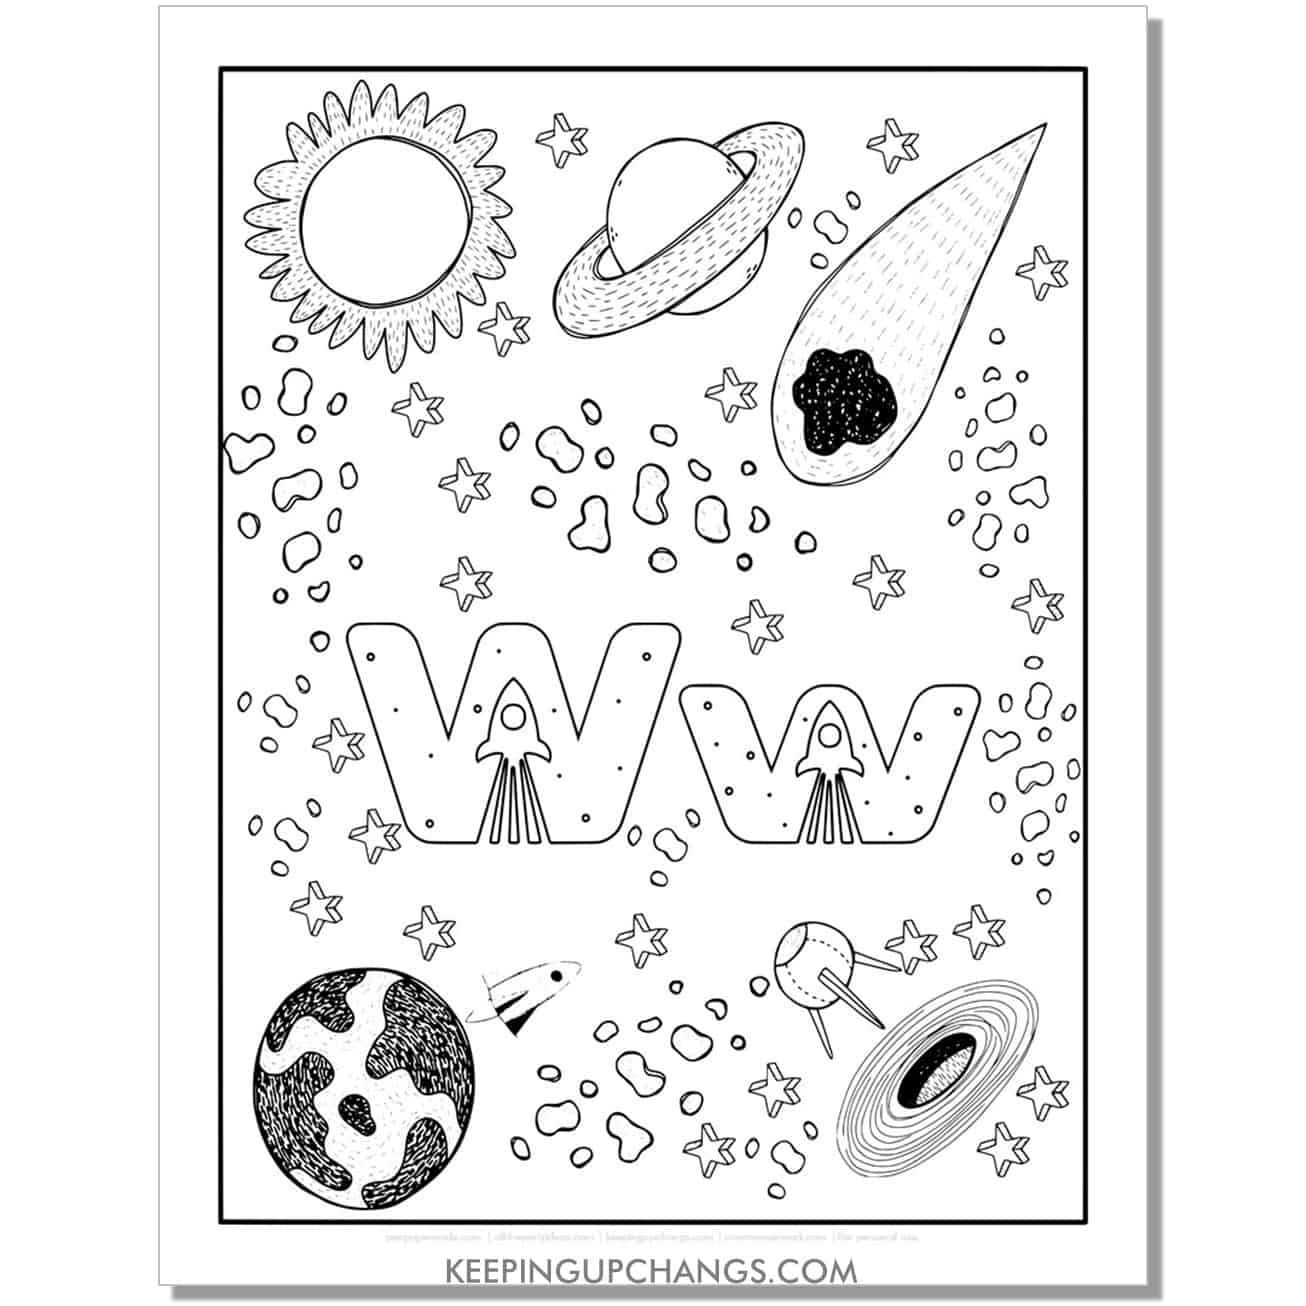 free alphabet letter w coloring page for kids with rockets, space theme.